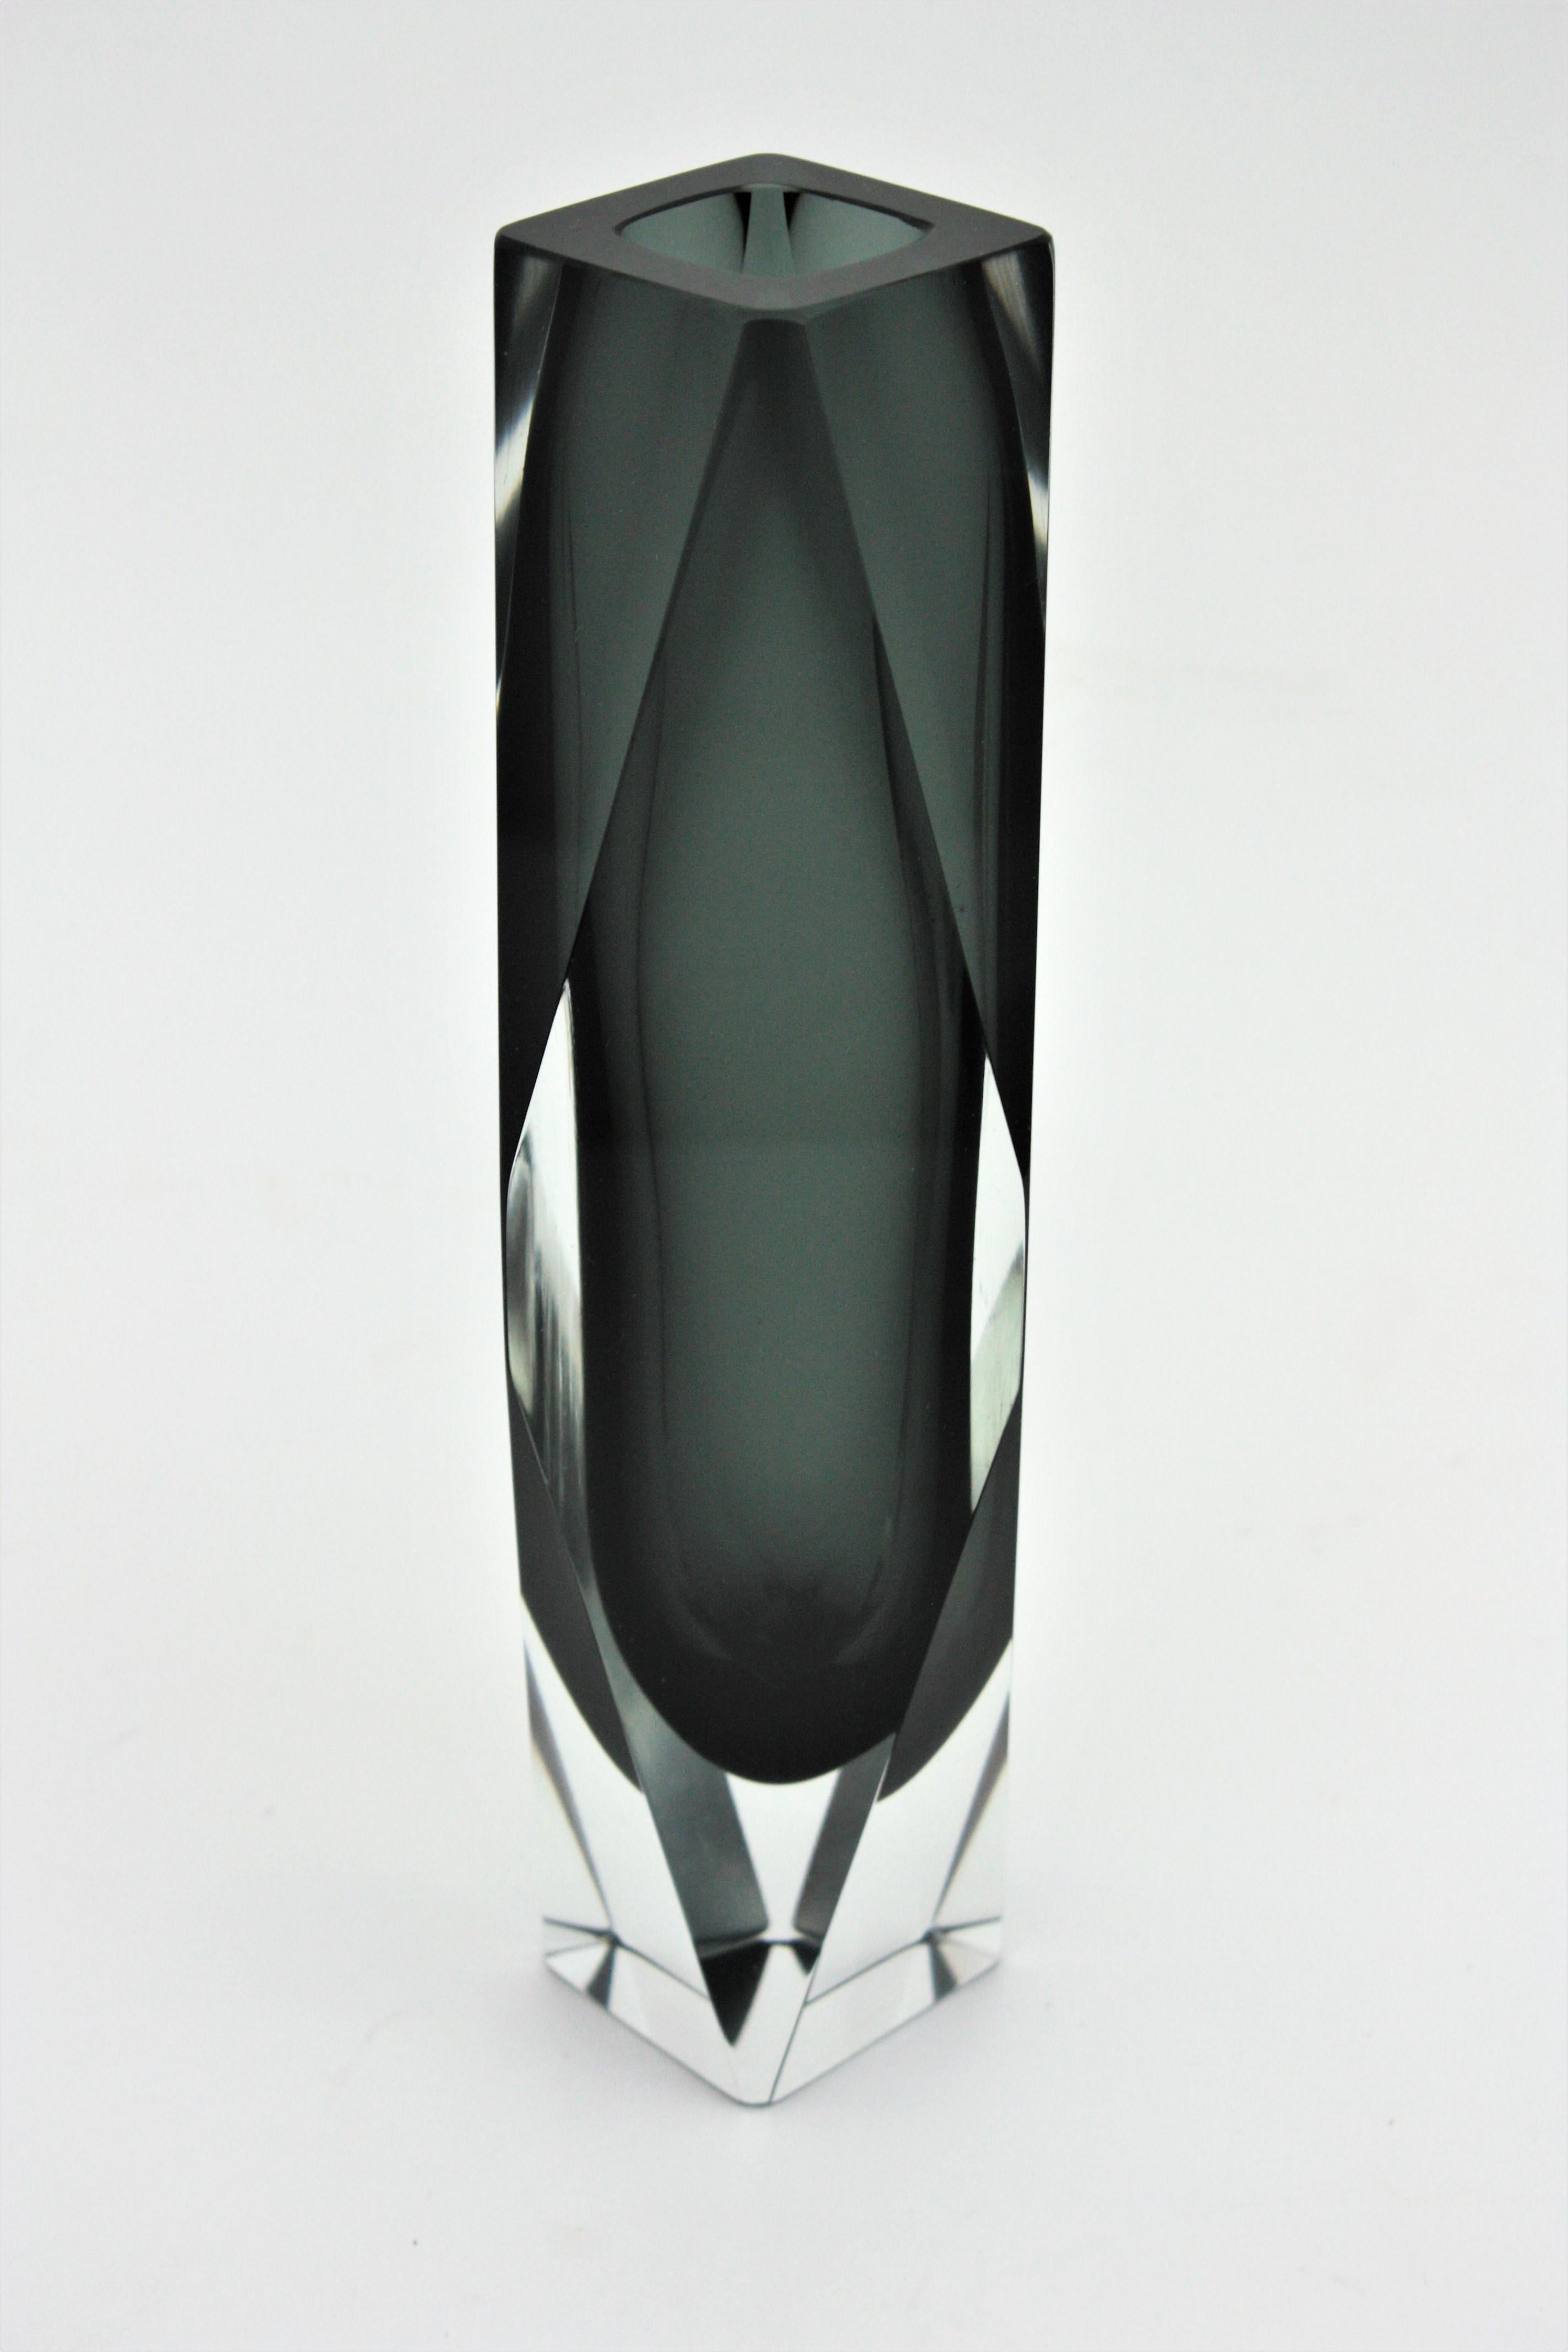 Giant Mandruzzato Murano Sommerso Smoked Grey Clear Faceted Art Glass Vase For Sale 1